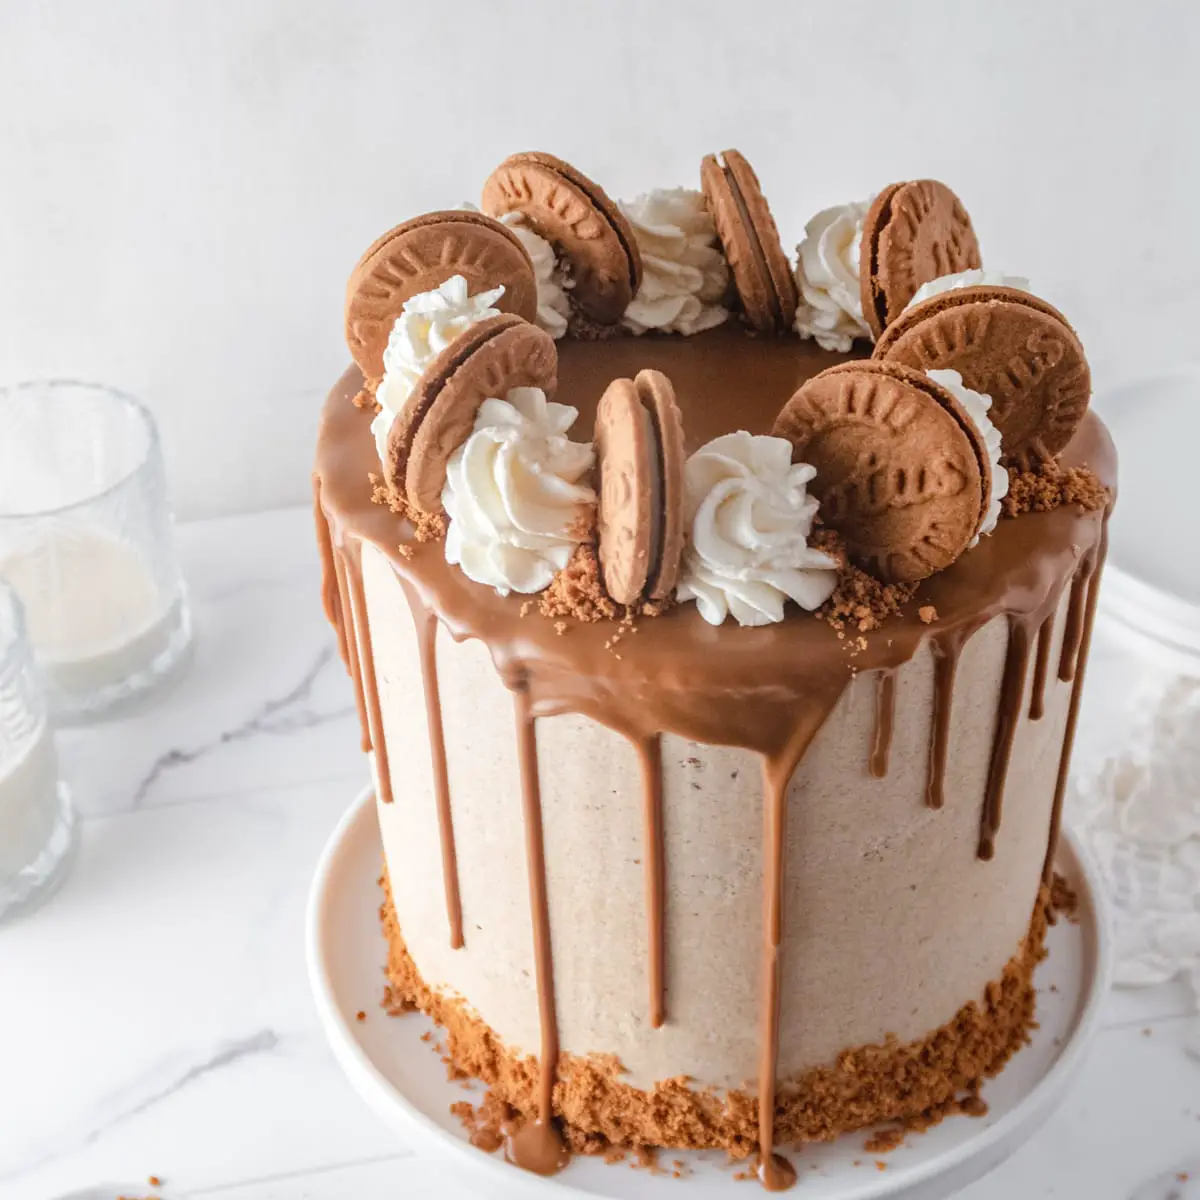 Angled down view of a vegan cake with a Biscoff drip and piped buttercream rosette and cookies on a white marbled background.